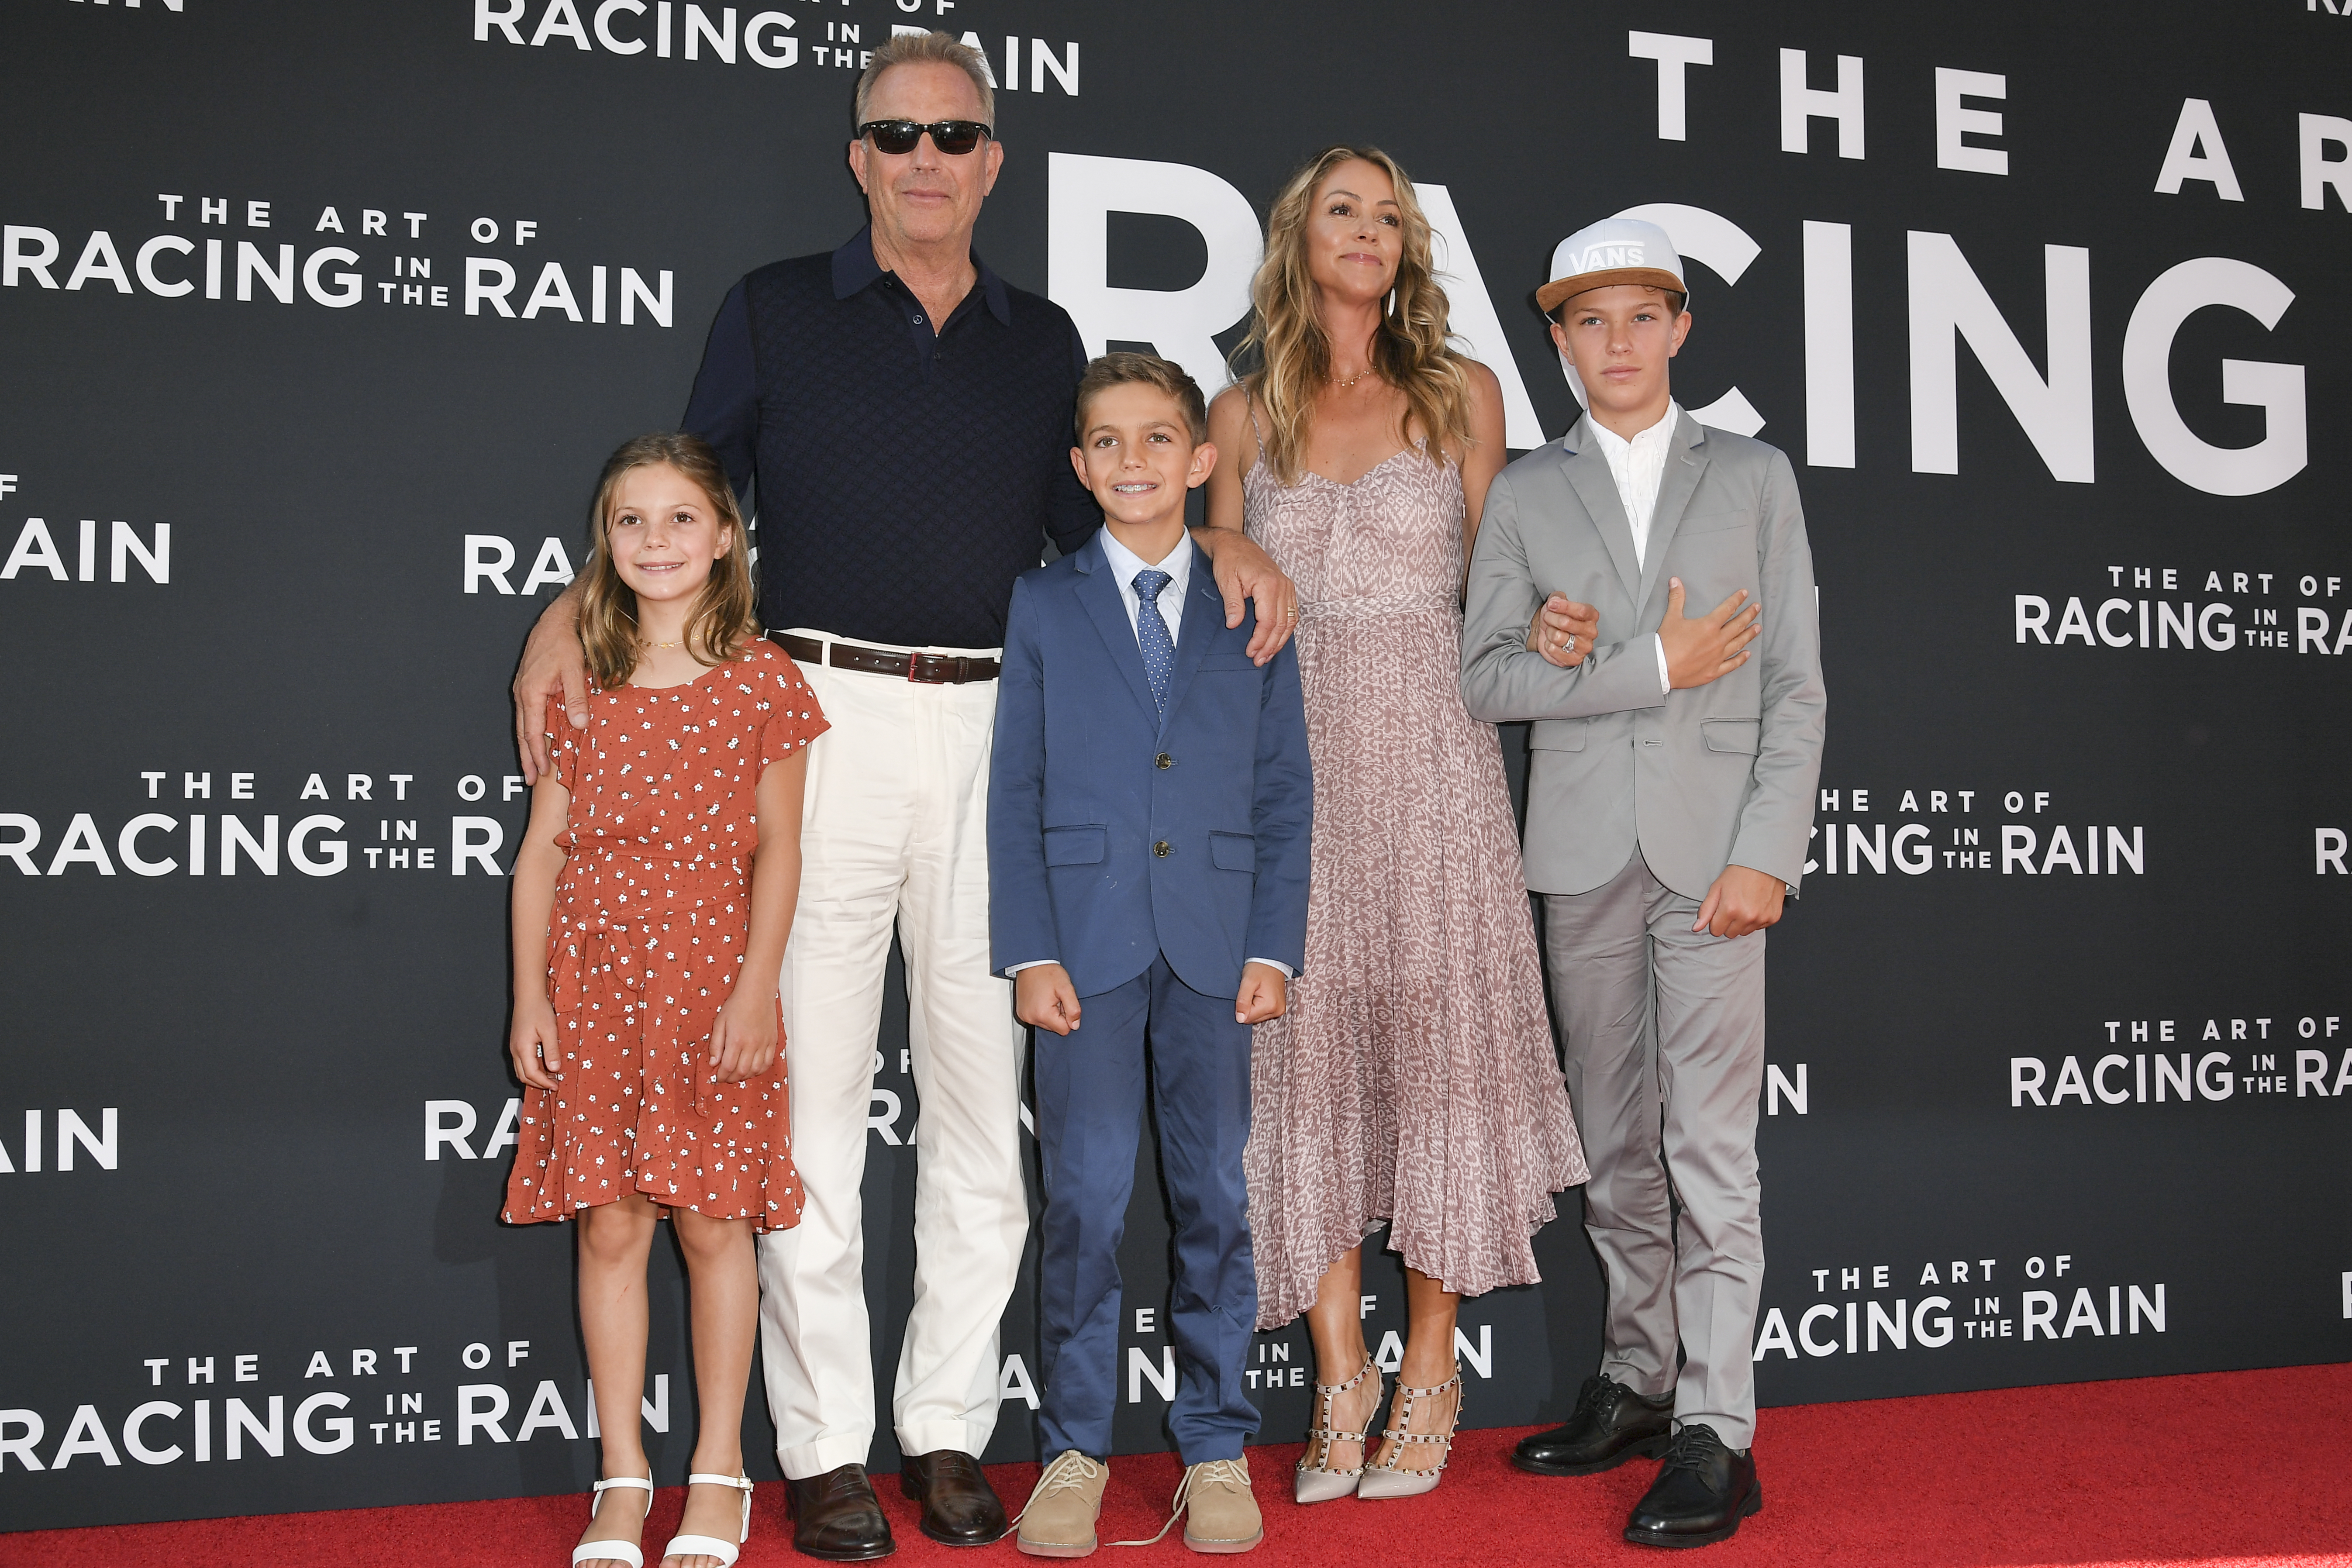 Kevin Costner and Christine Baumgartner at the 'The Art of Racing in the Rain' premiere at El Capitan Theatre, Los Angeles in 2019 | Source: Getty Images